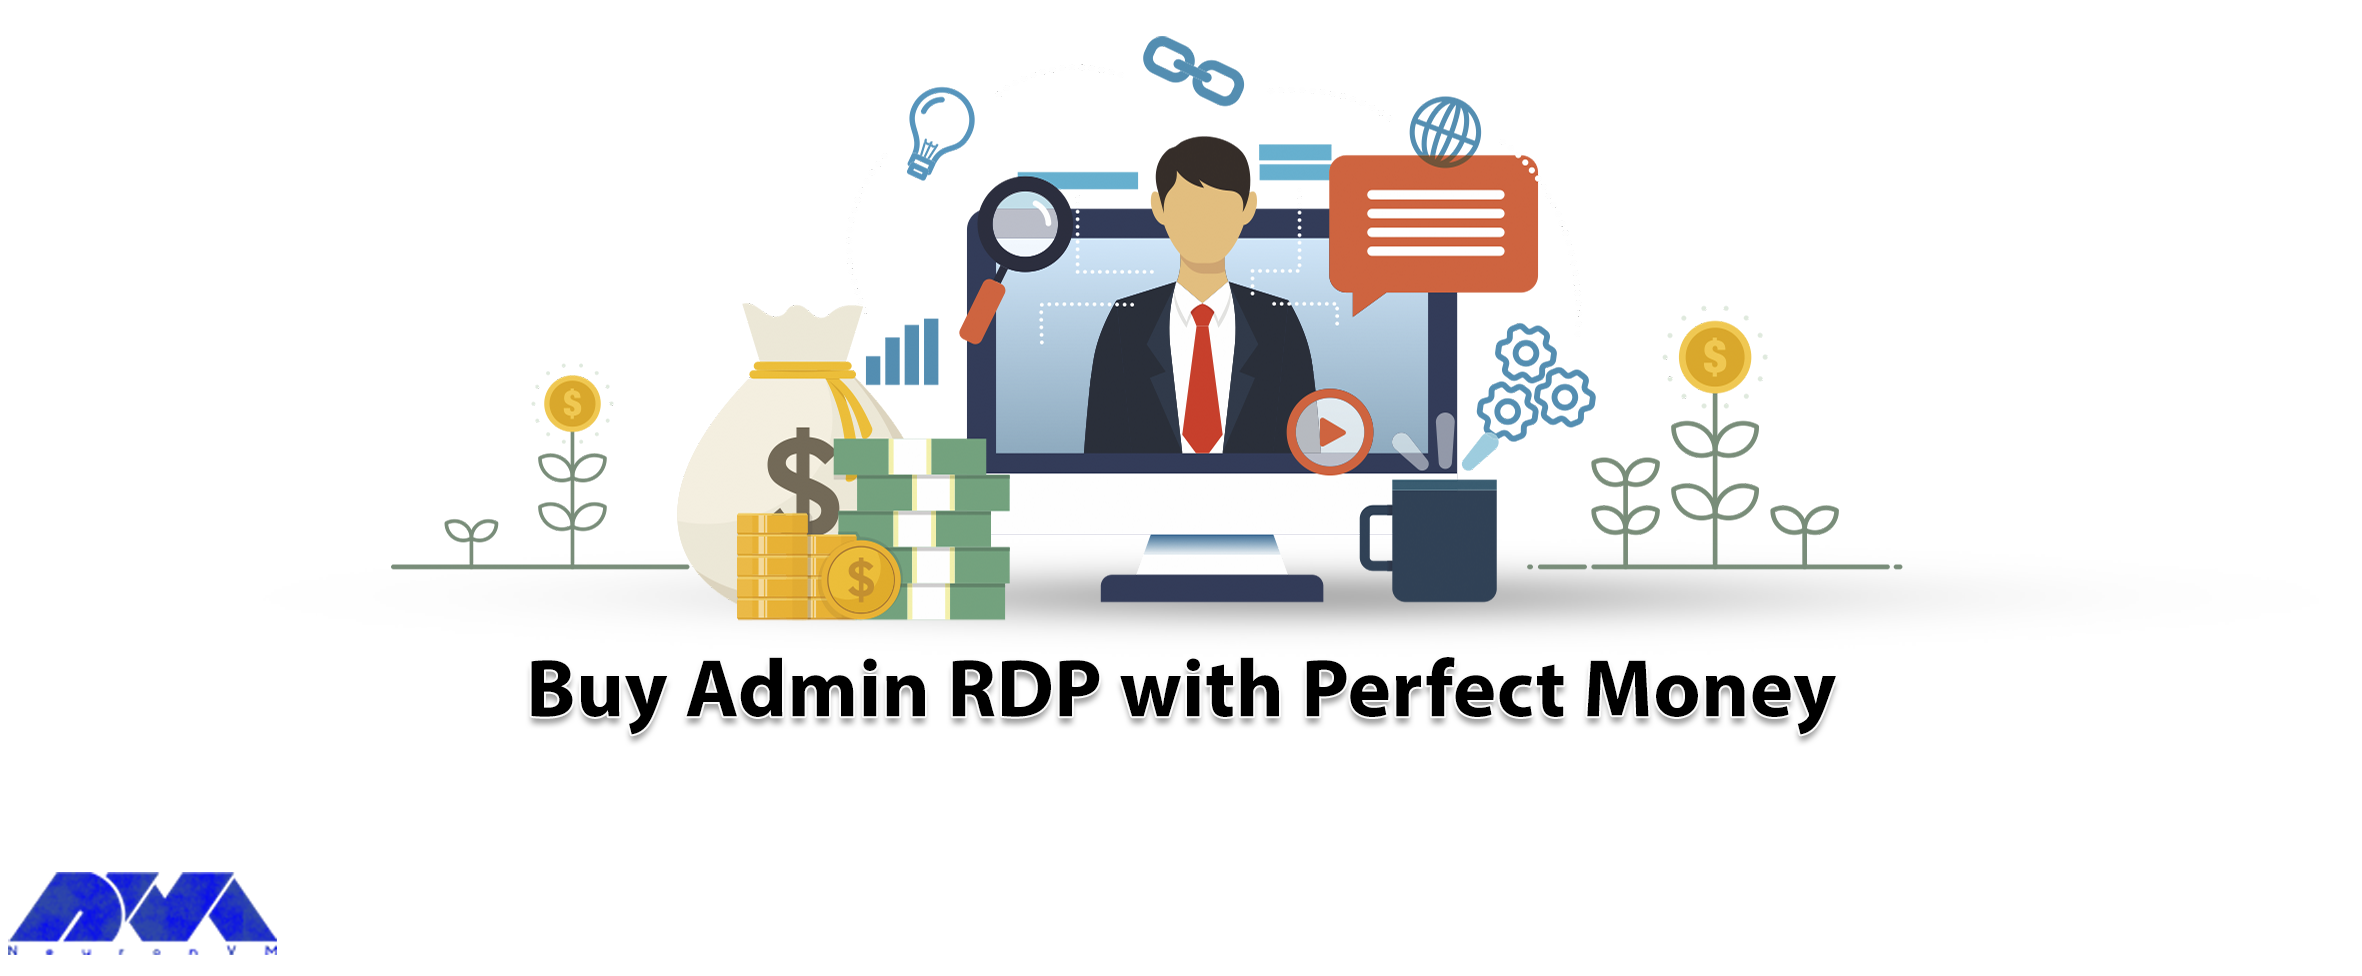 Buy Admin RDP with Perfect Money